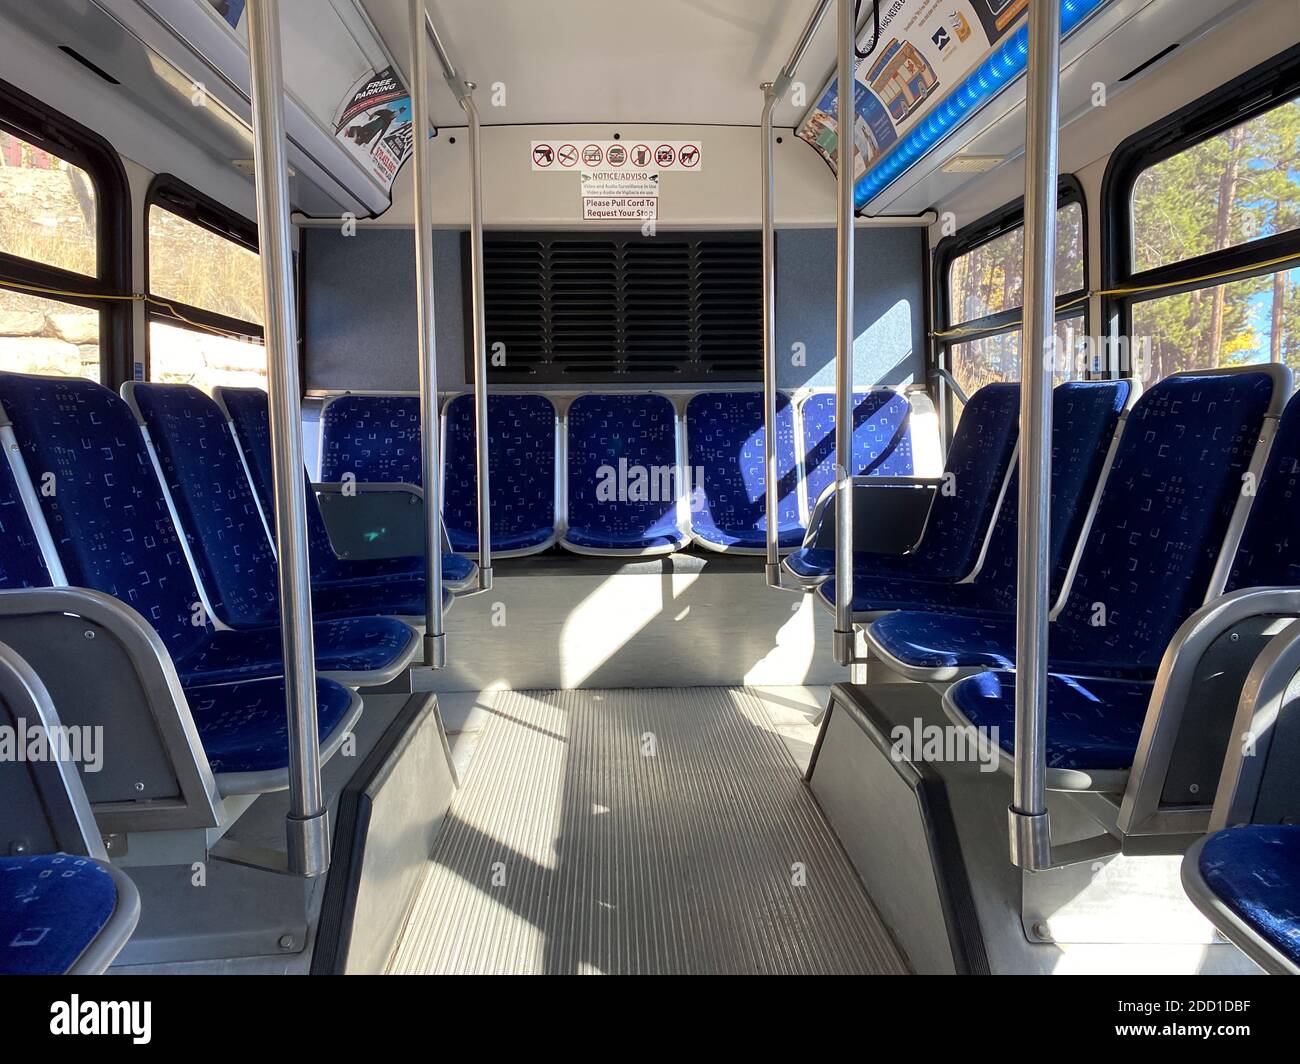 Breckenridge, CO / USA - September 29, 2020: Inside view of clean and empty seat Breckenridge free ride bus on colorado Stock Photo